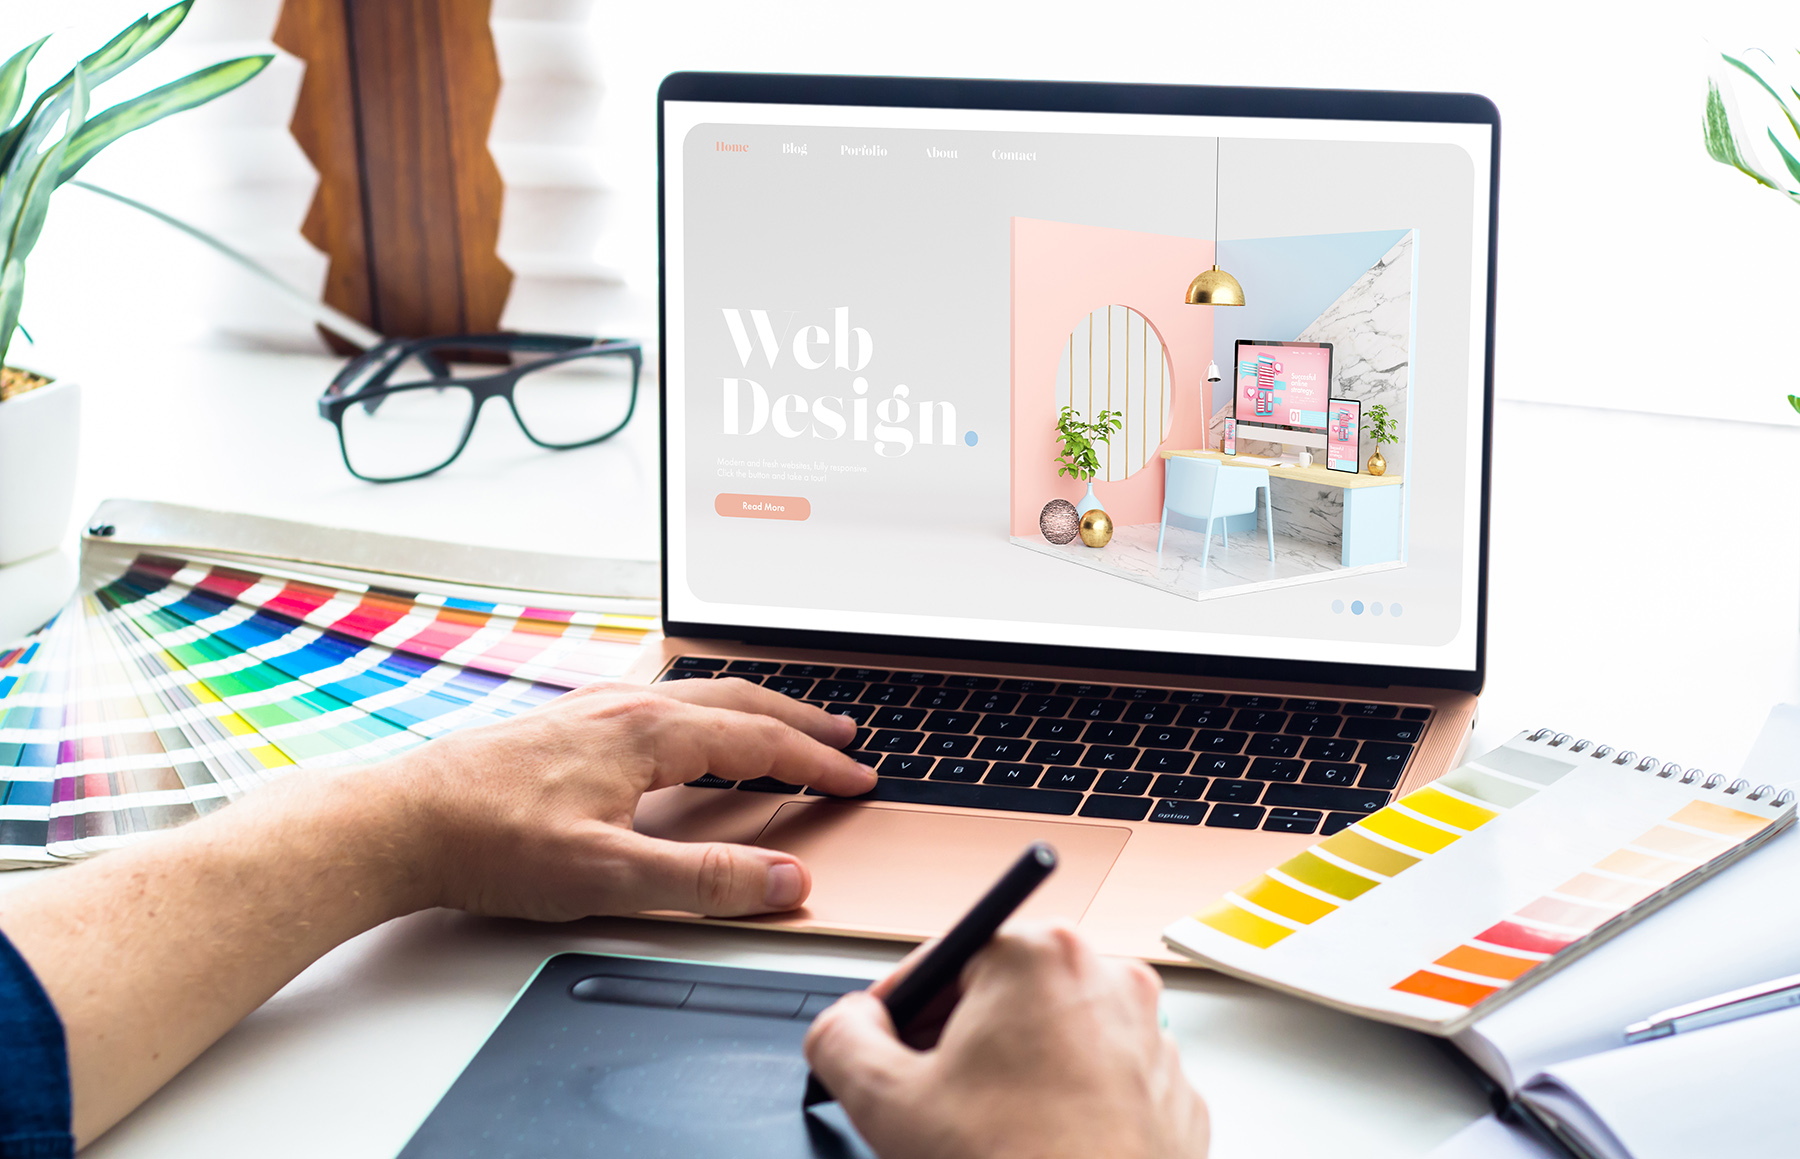 Your beautifully designed website